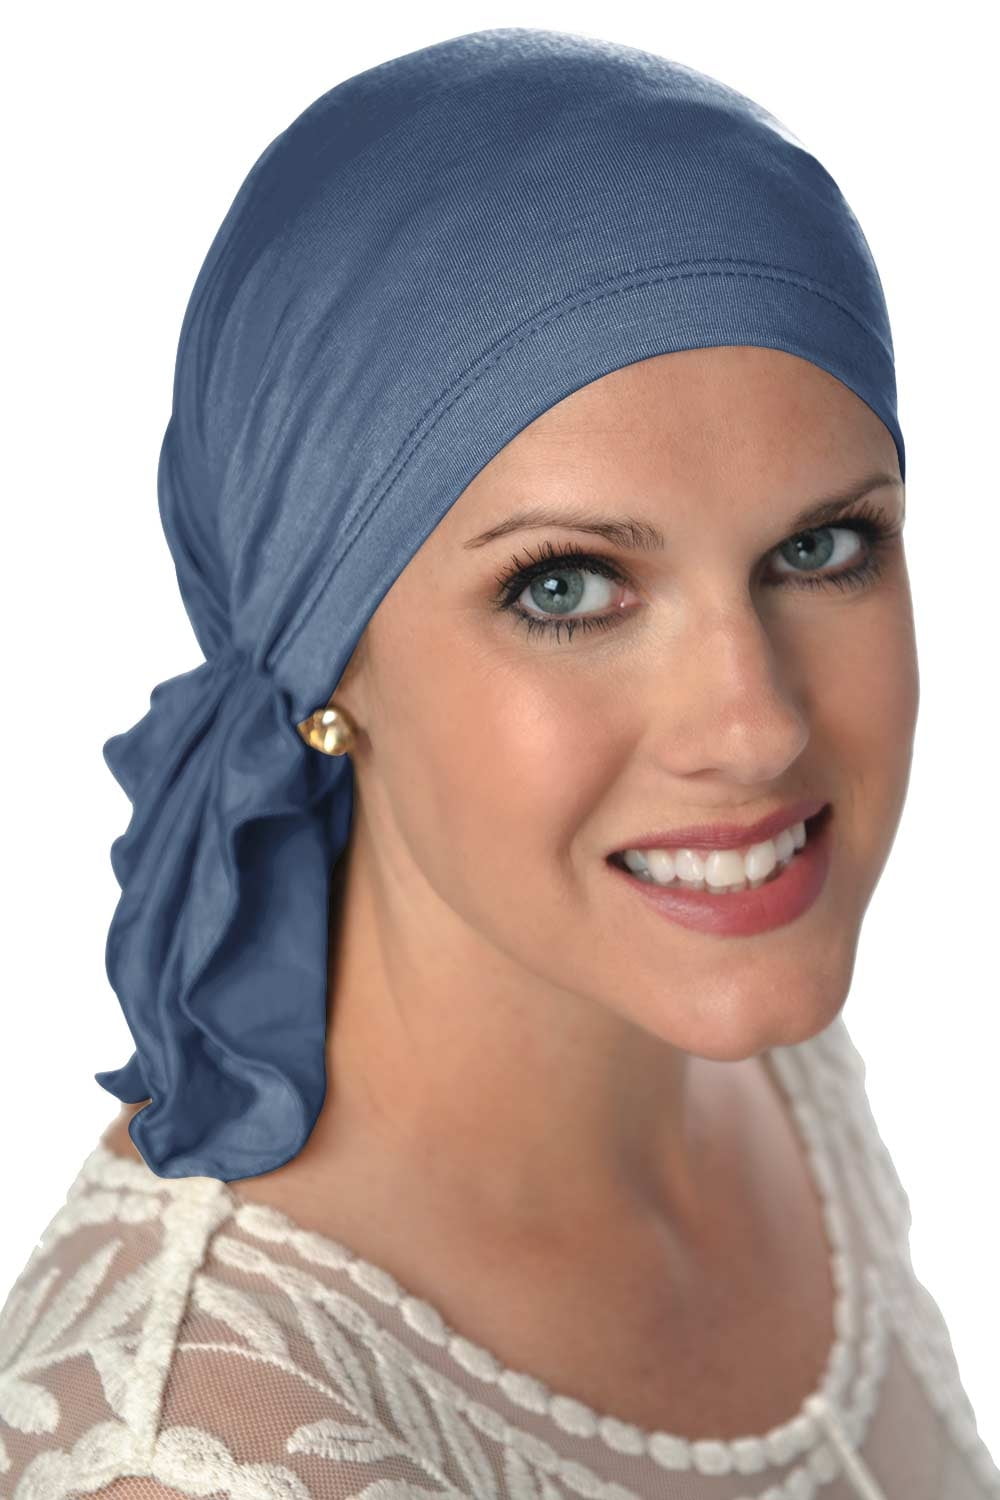 Pleated Bow Cap Heather Navy Blue Chemo Cancer Scarves Caps Wraps Hats Turbans for Women